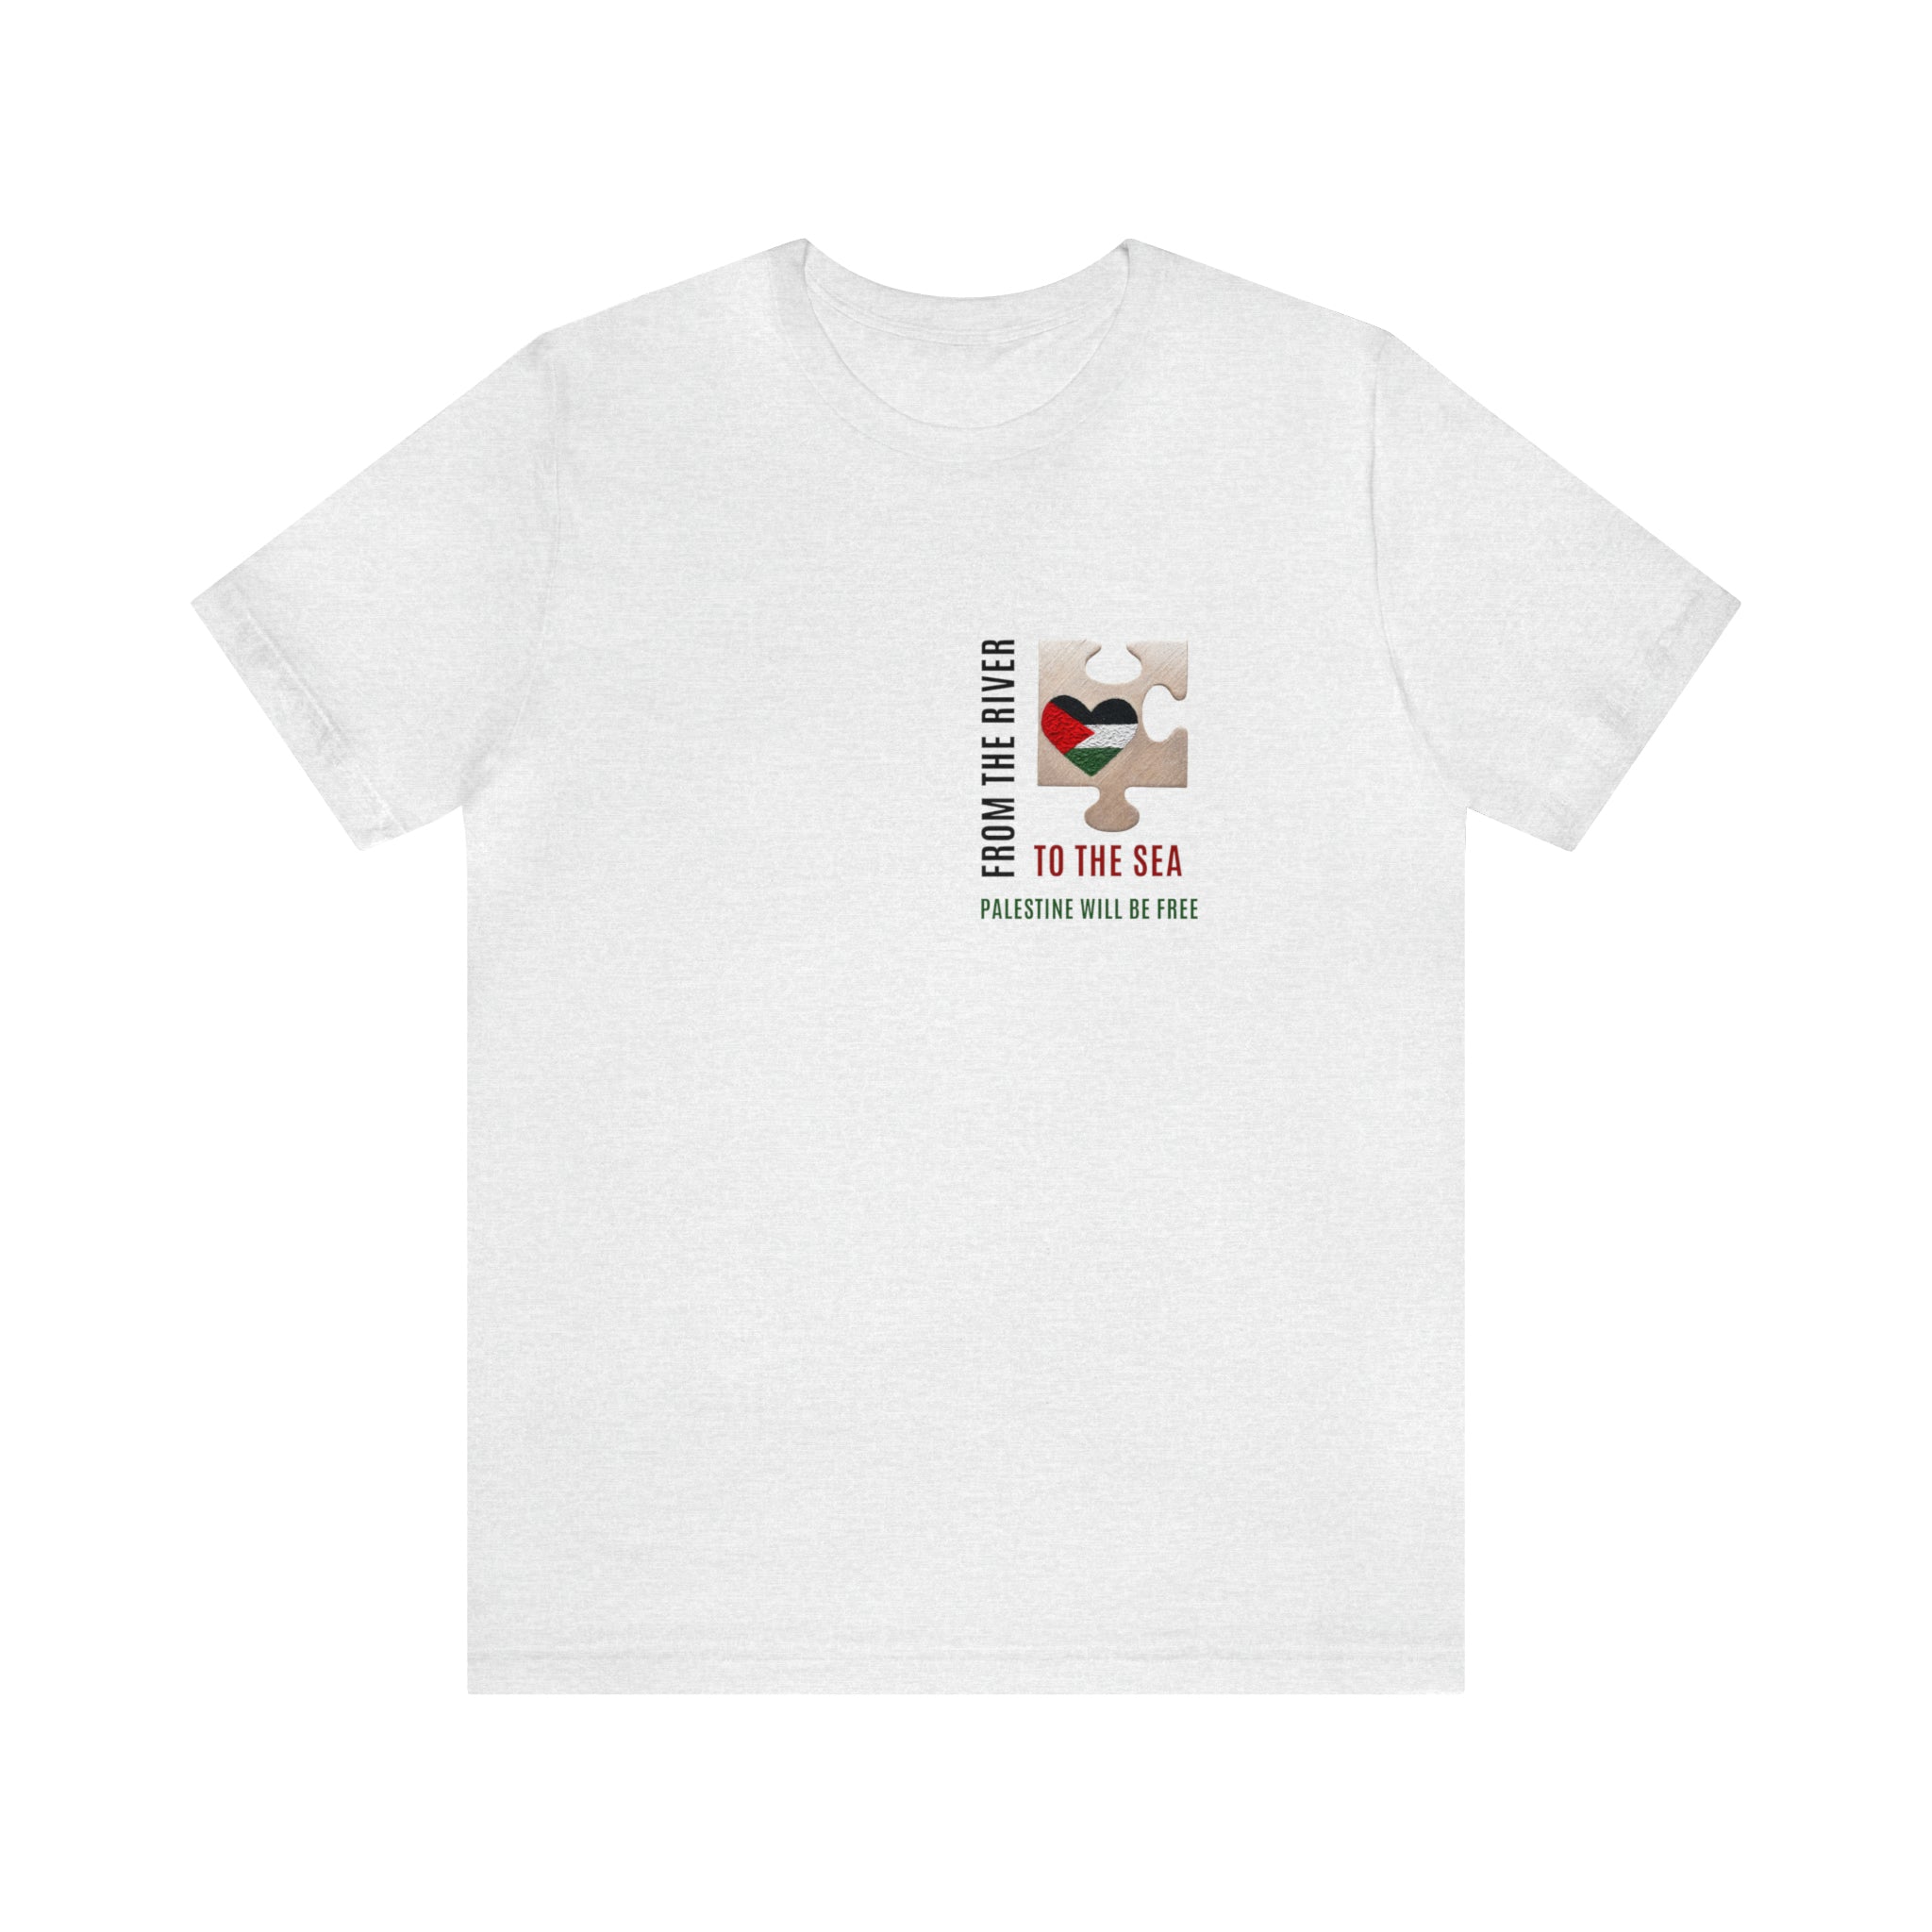 Pieces of Palestine 2 | Jersey Short Sleeve Tee